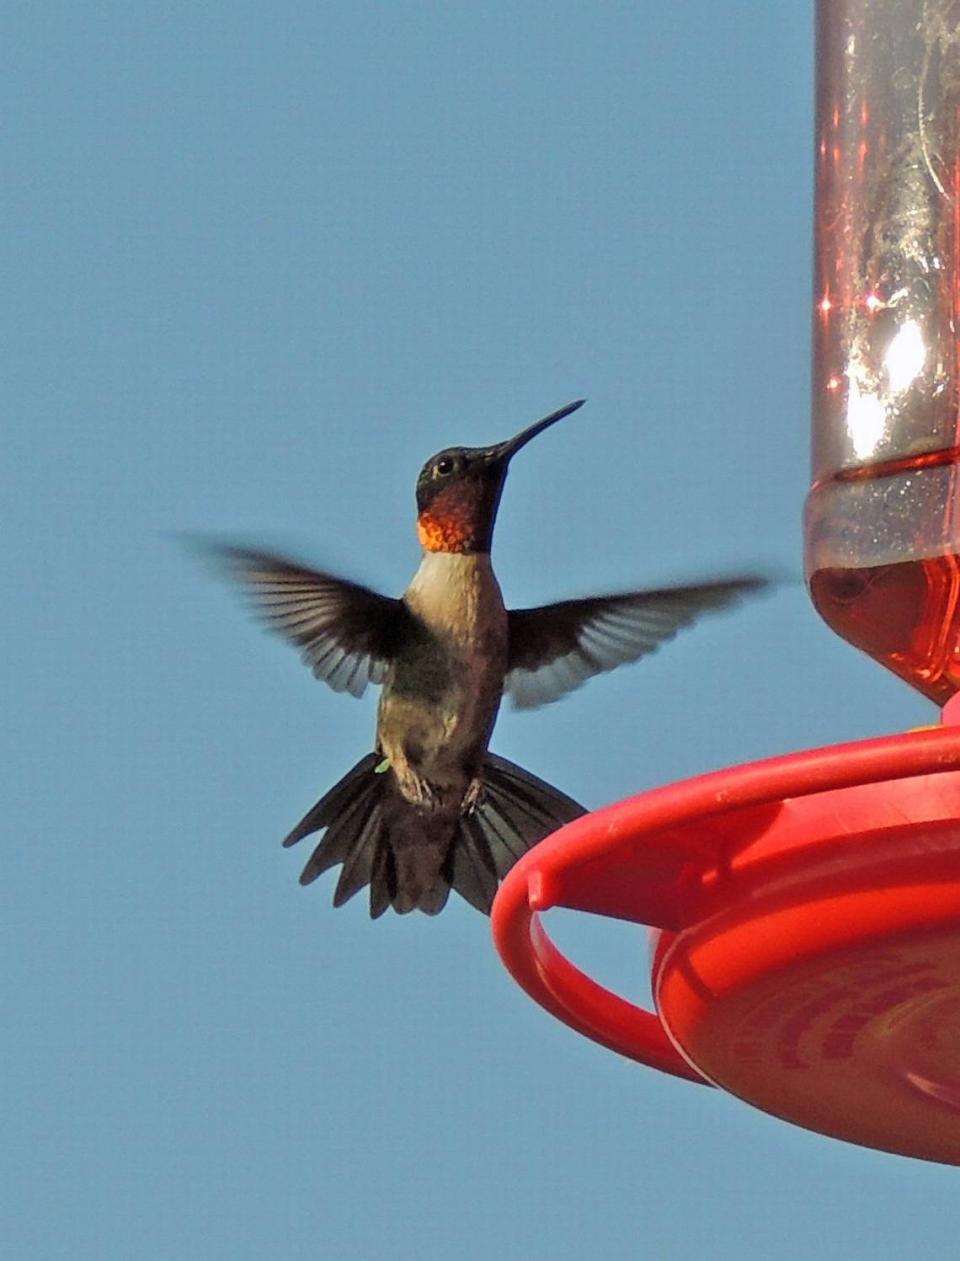 If you put out birdfeeders, researchers say they should be cleaned regularly to prevent illness. Here, a ruby-throated hummingbird is at a feeder in 2016.